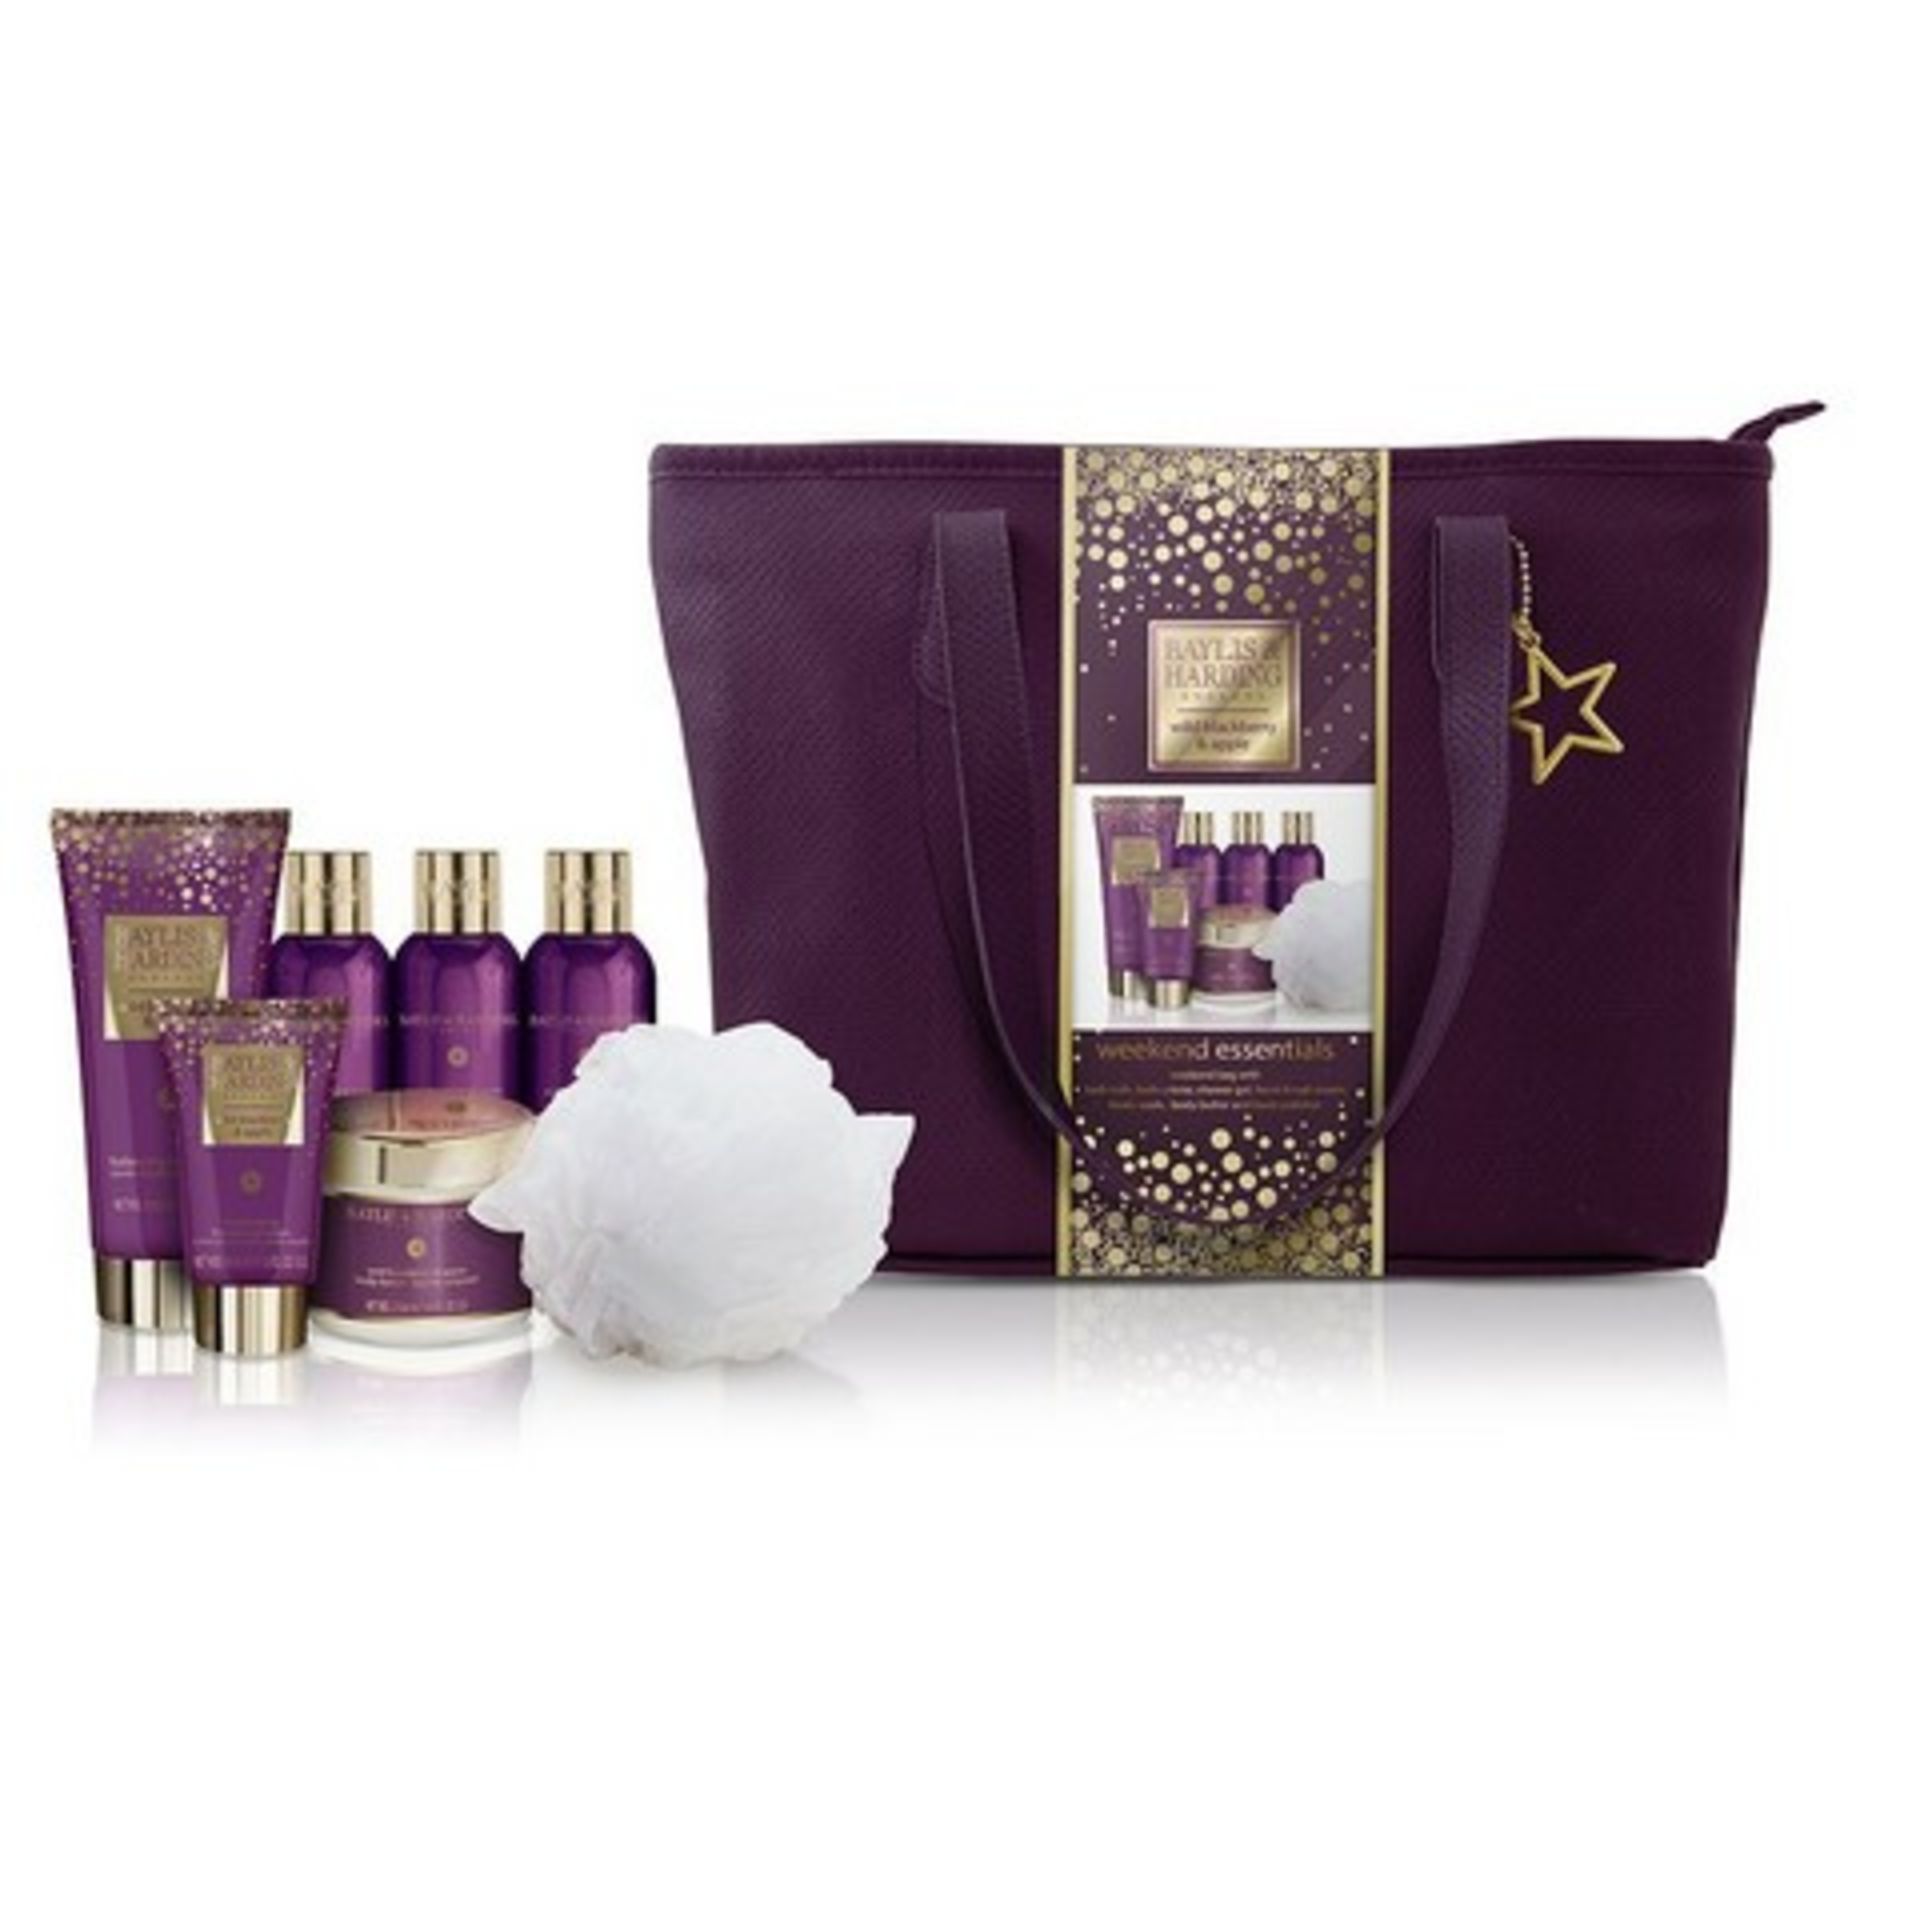 + VAT Brand New Baylis & Harding Wild Blackberry and Apple Relax and Retreat Weekend Bag Including